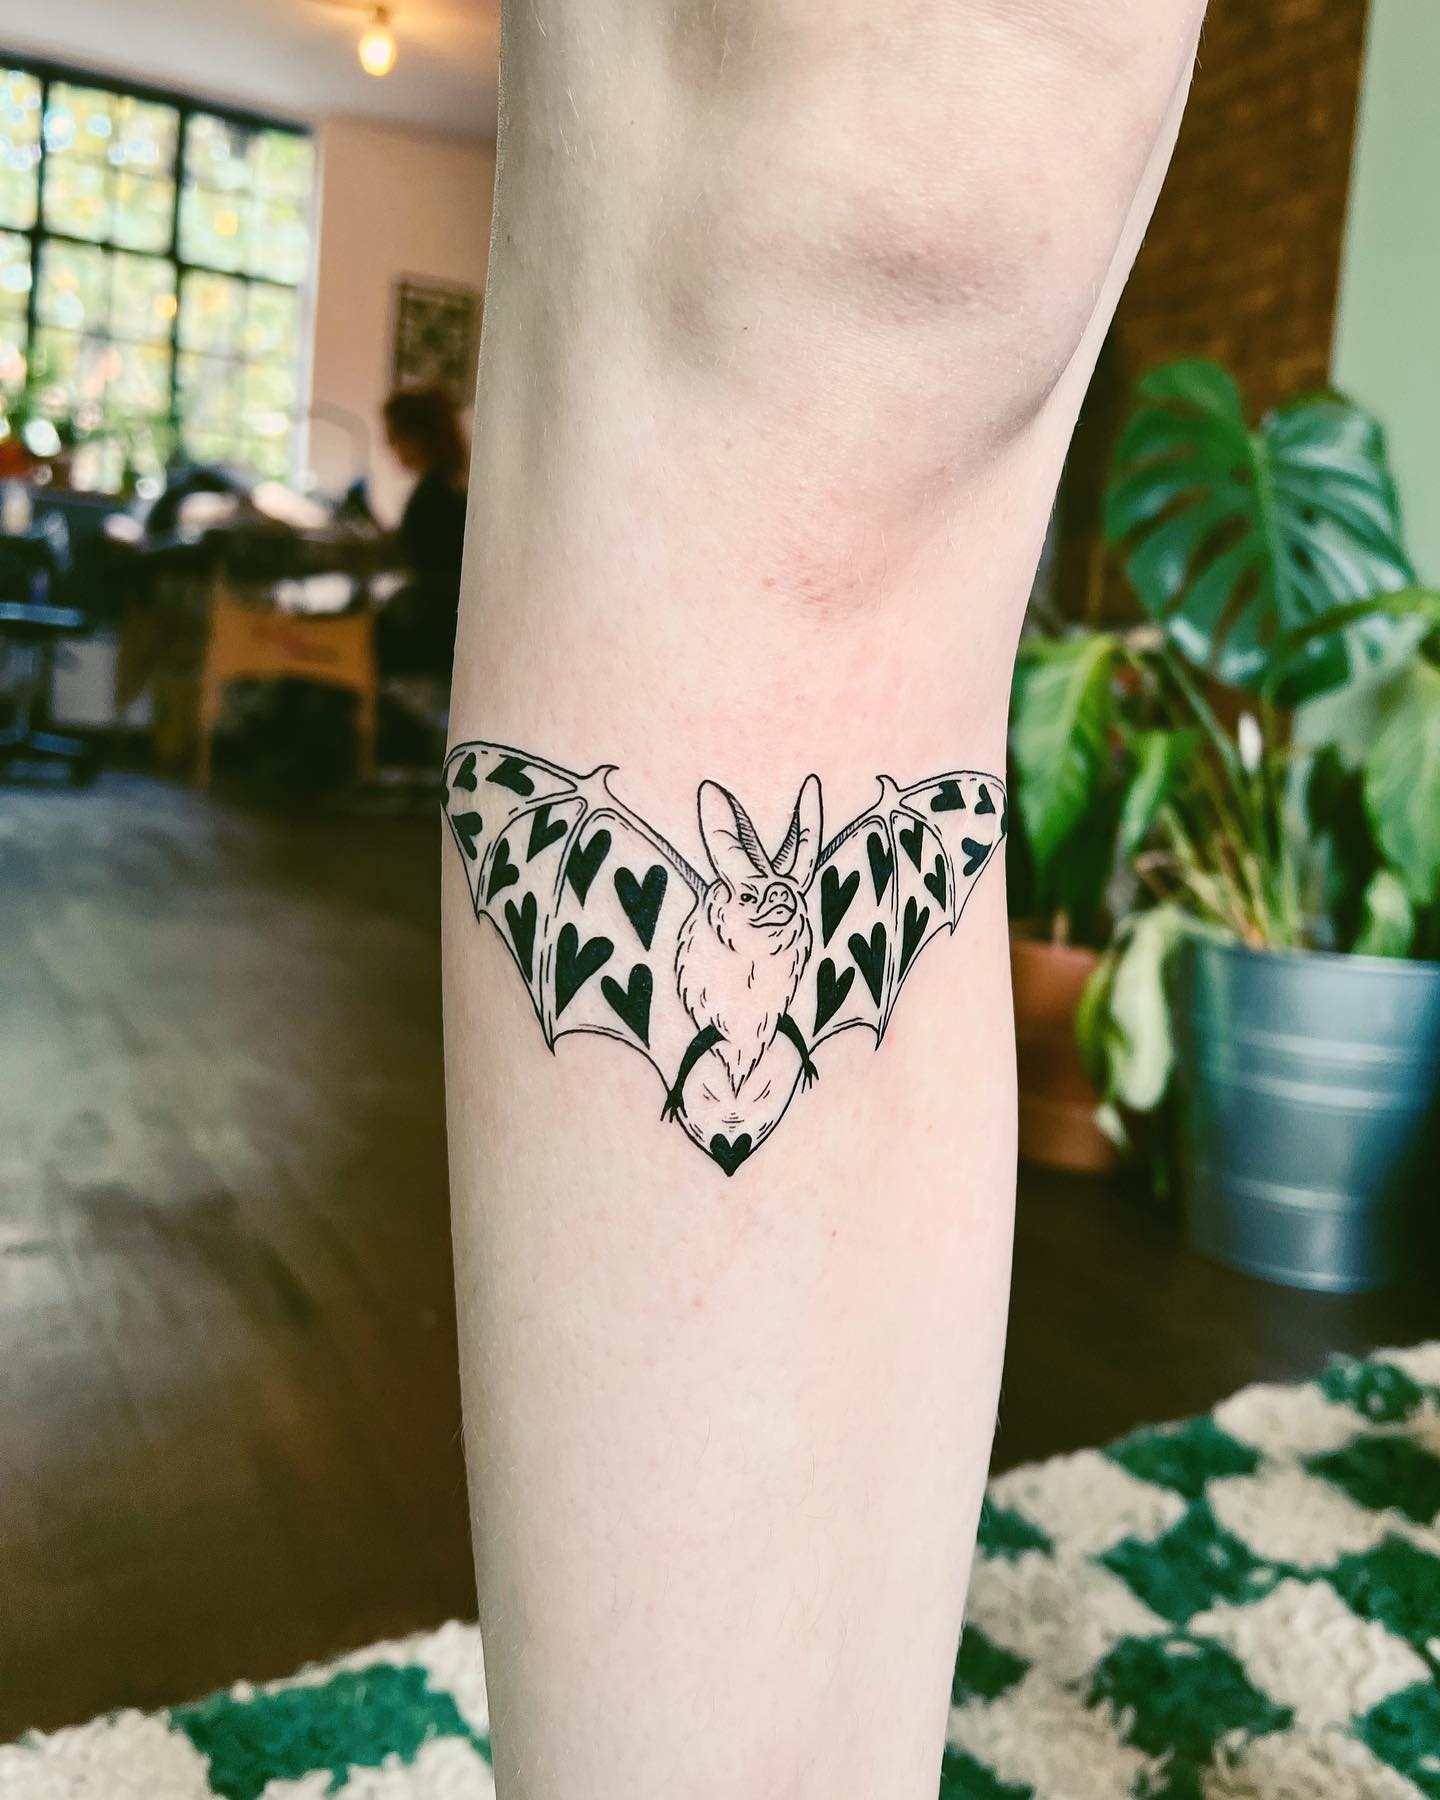 Little bat tattoo D Done by Andrew at Two Fathoms in Hannibal MO  r tattoos